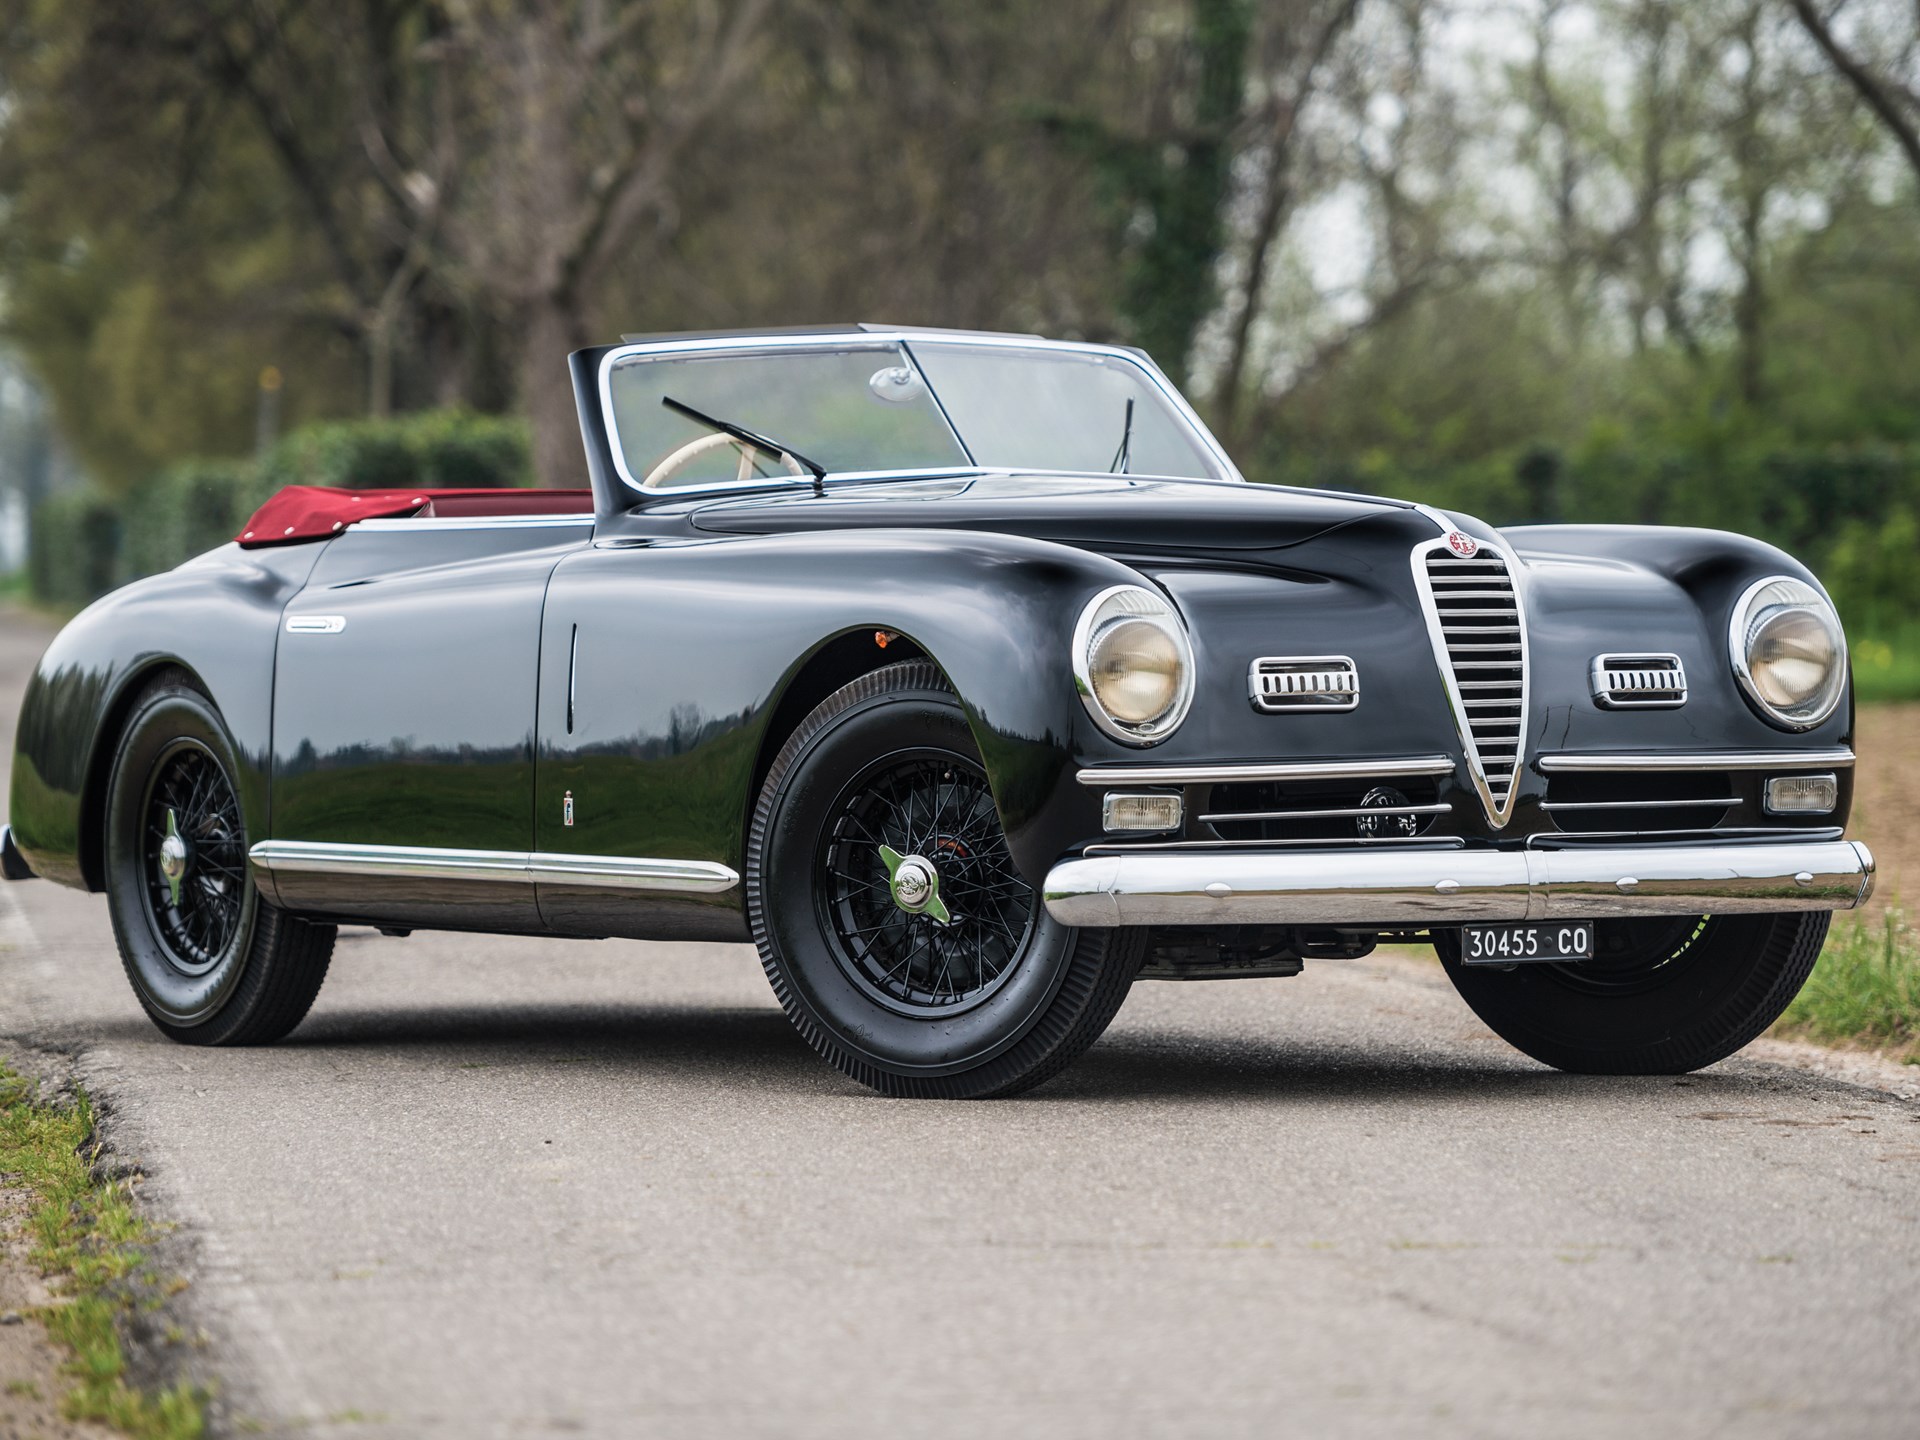 RM Sotheby's - 1949 Alfa Romeo 6C 2500 Super Sport Cabriolet by Pinin